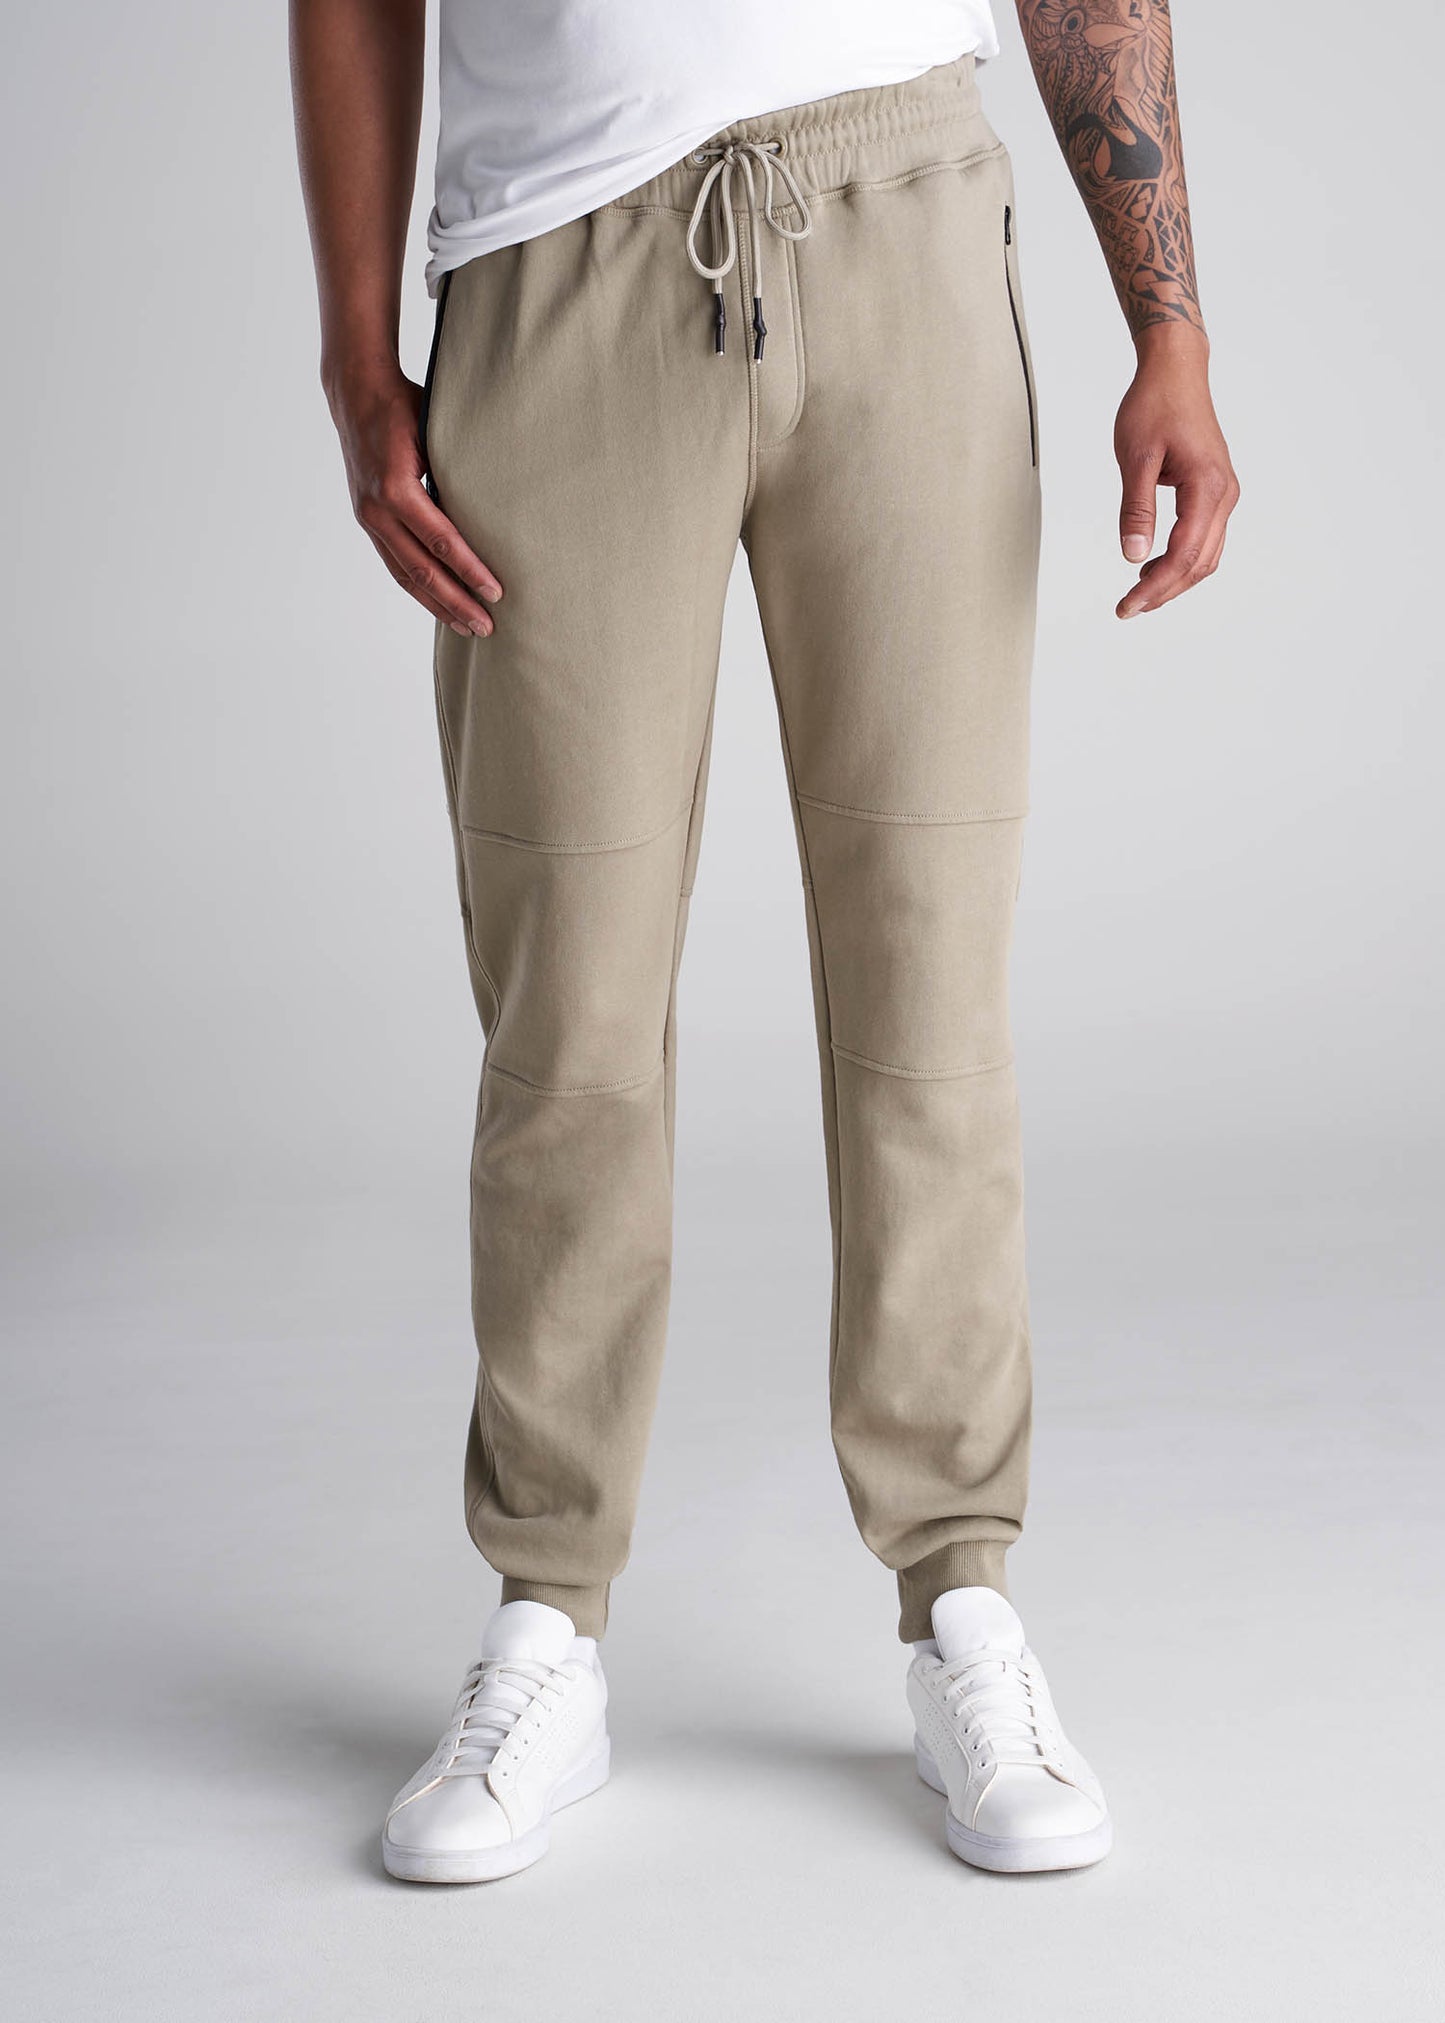 Wearever French Terry Men's Tall Joggers in Khaki